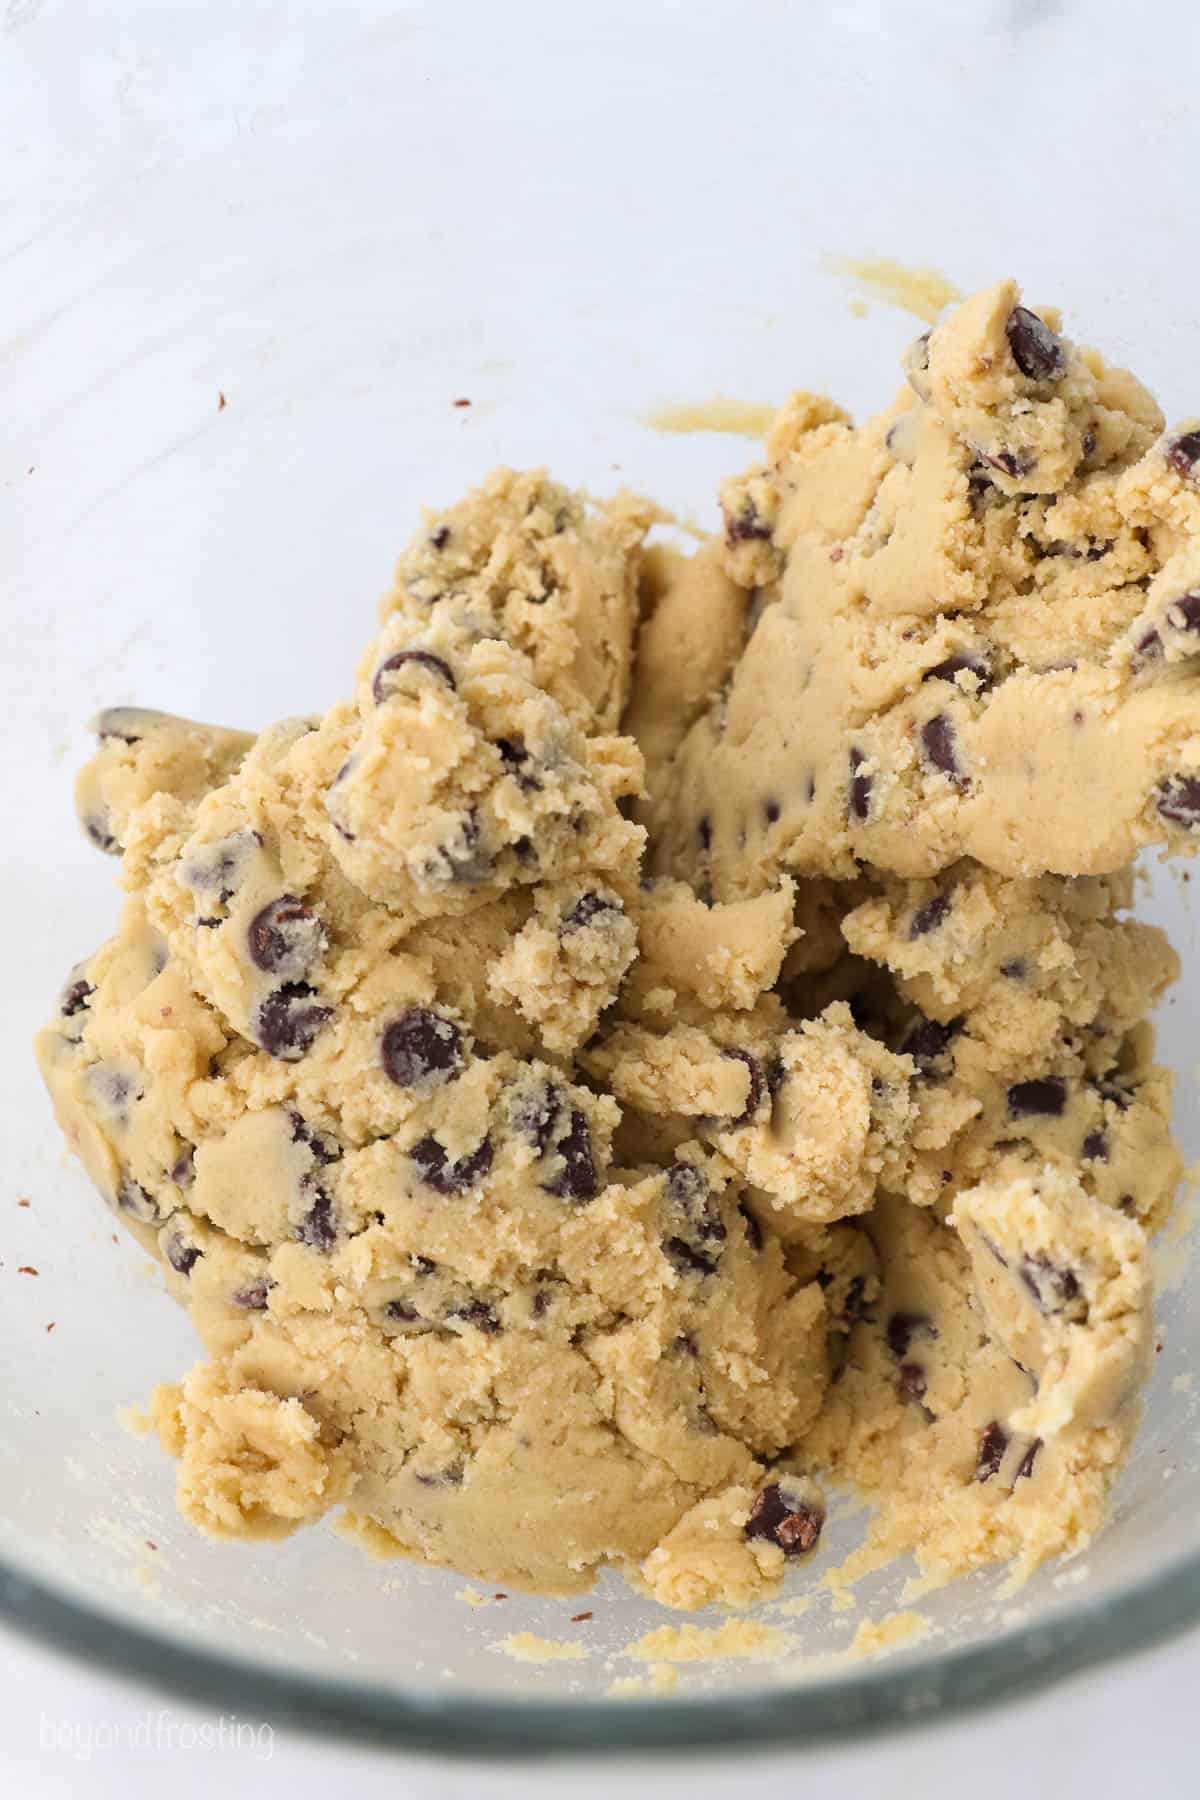 Chocolate chip cookie dough batter in a glass bowl